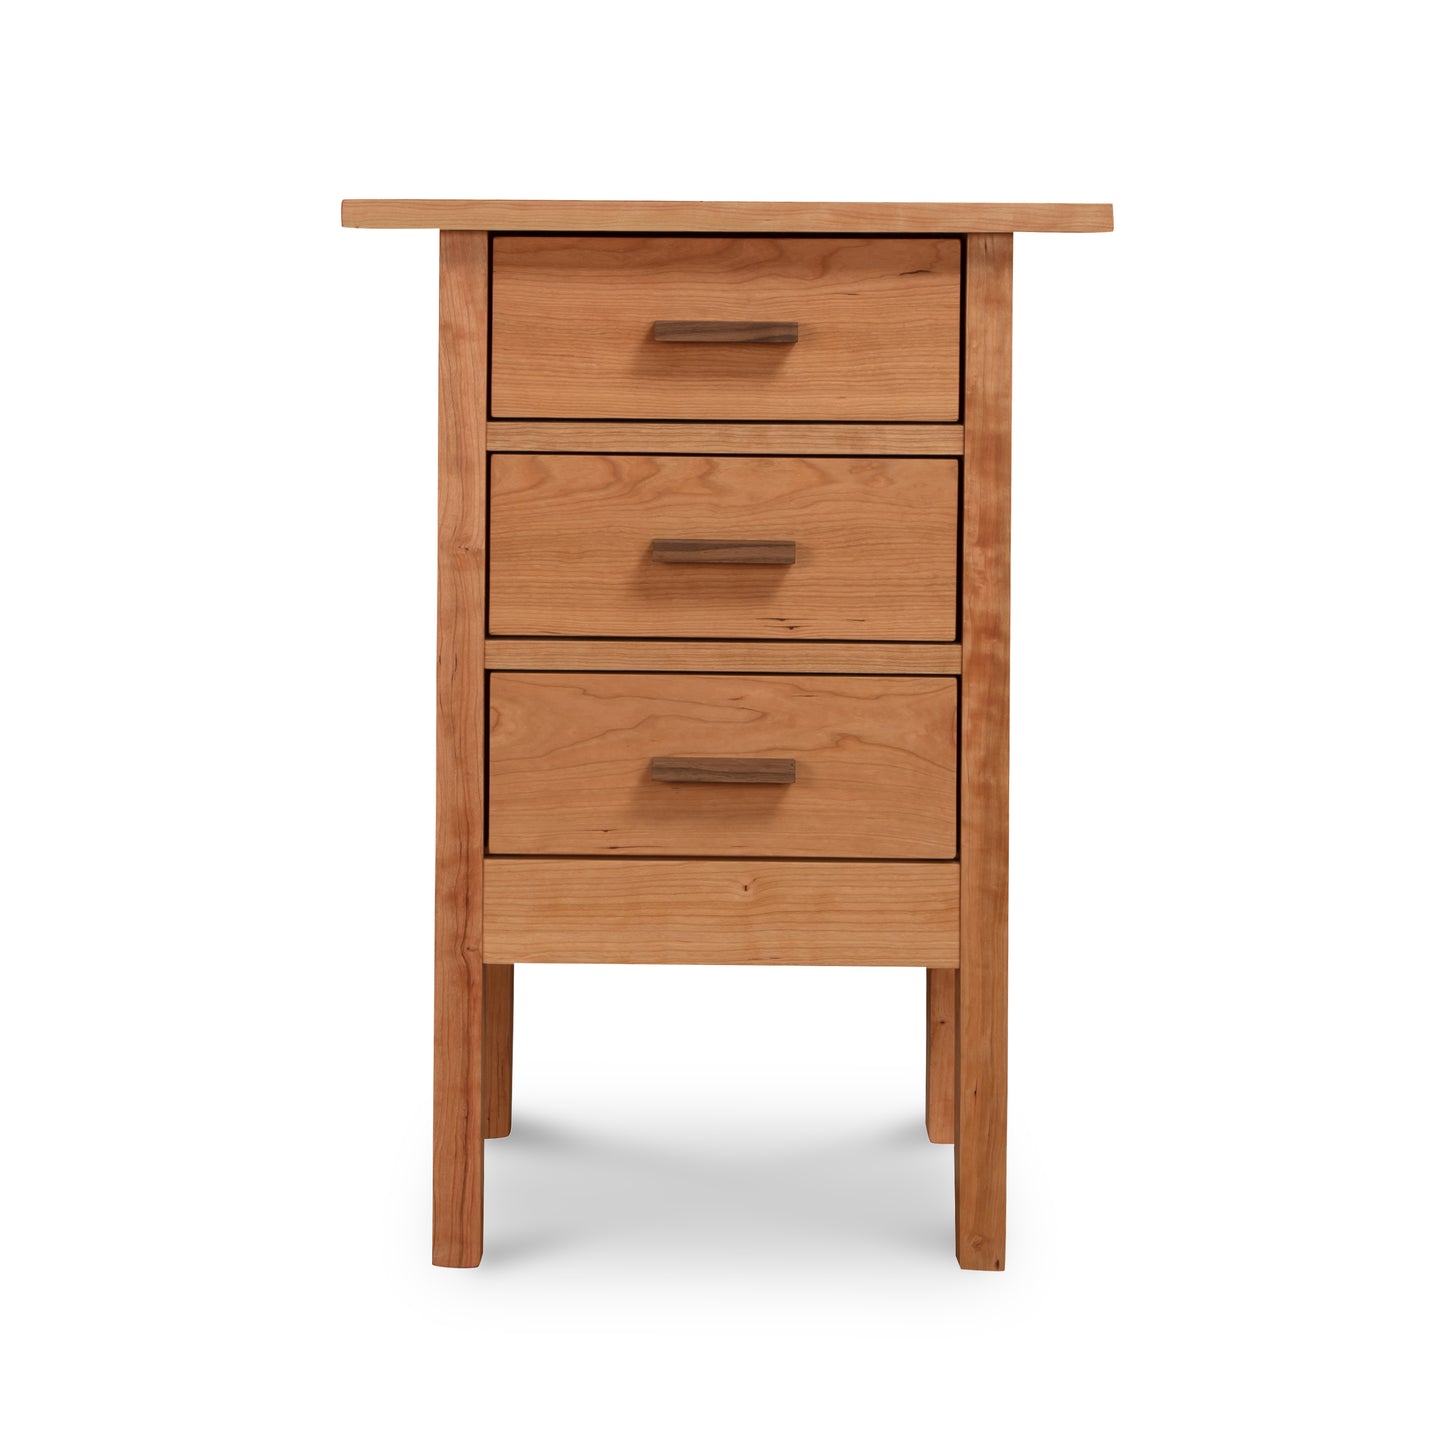 A Modern Craftsman 3-Drawer Nightstand by Vermont Furniture Designs, perfect for a modern craftsman or contemporary bedroom.